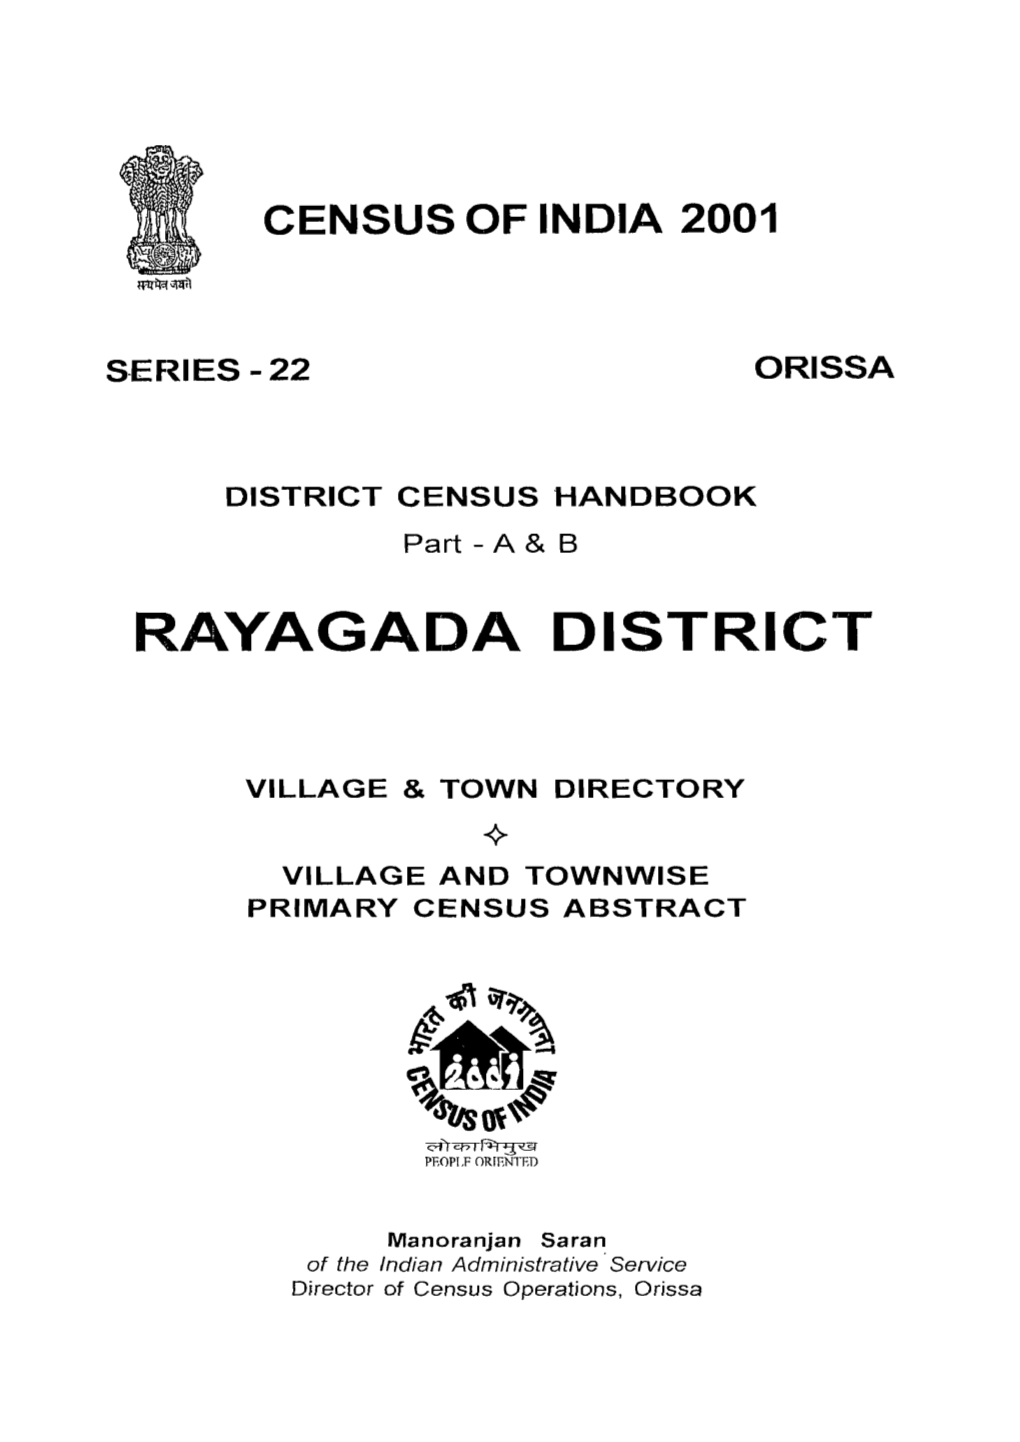 Village and Townwise Primary Census Abstract, Rayagada, Part